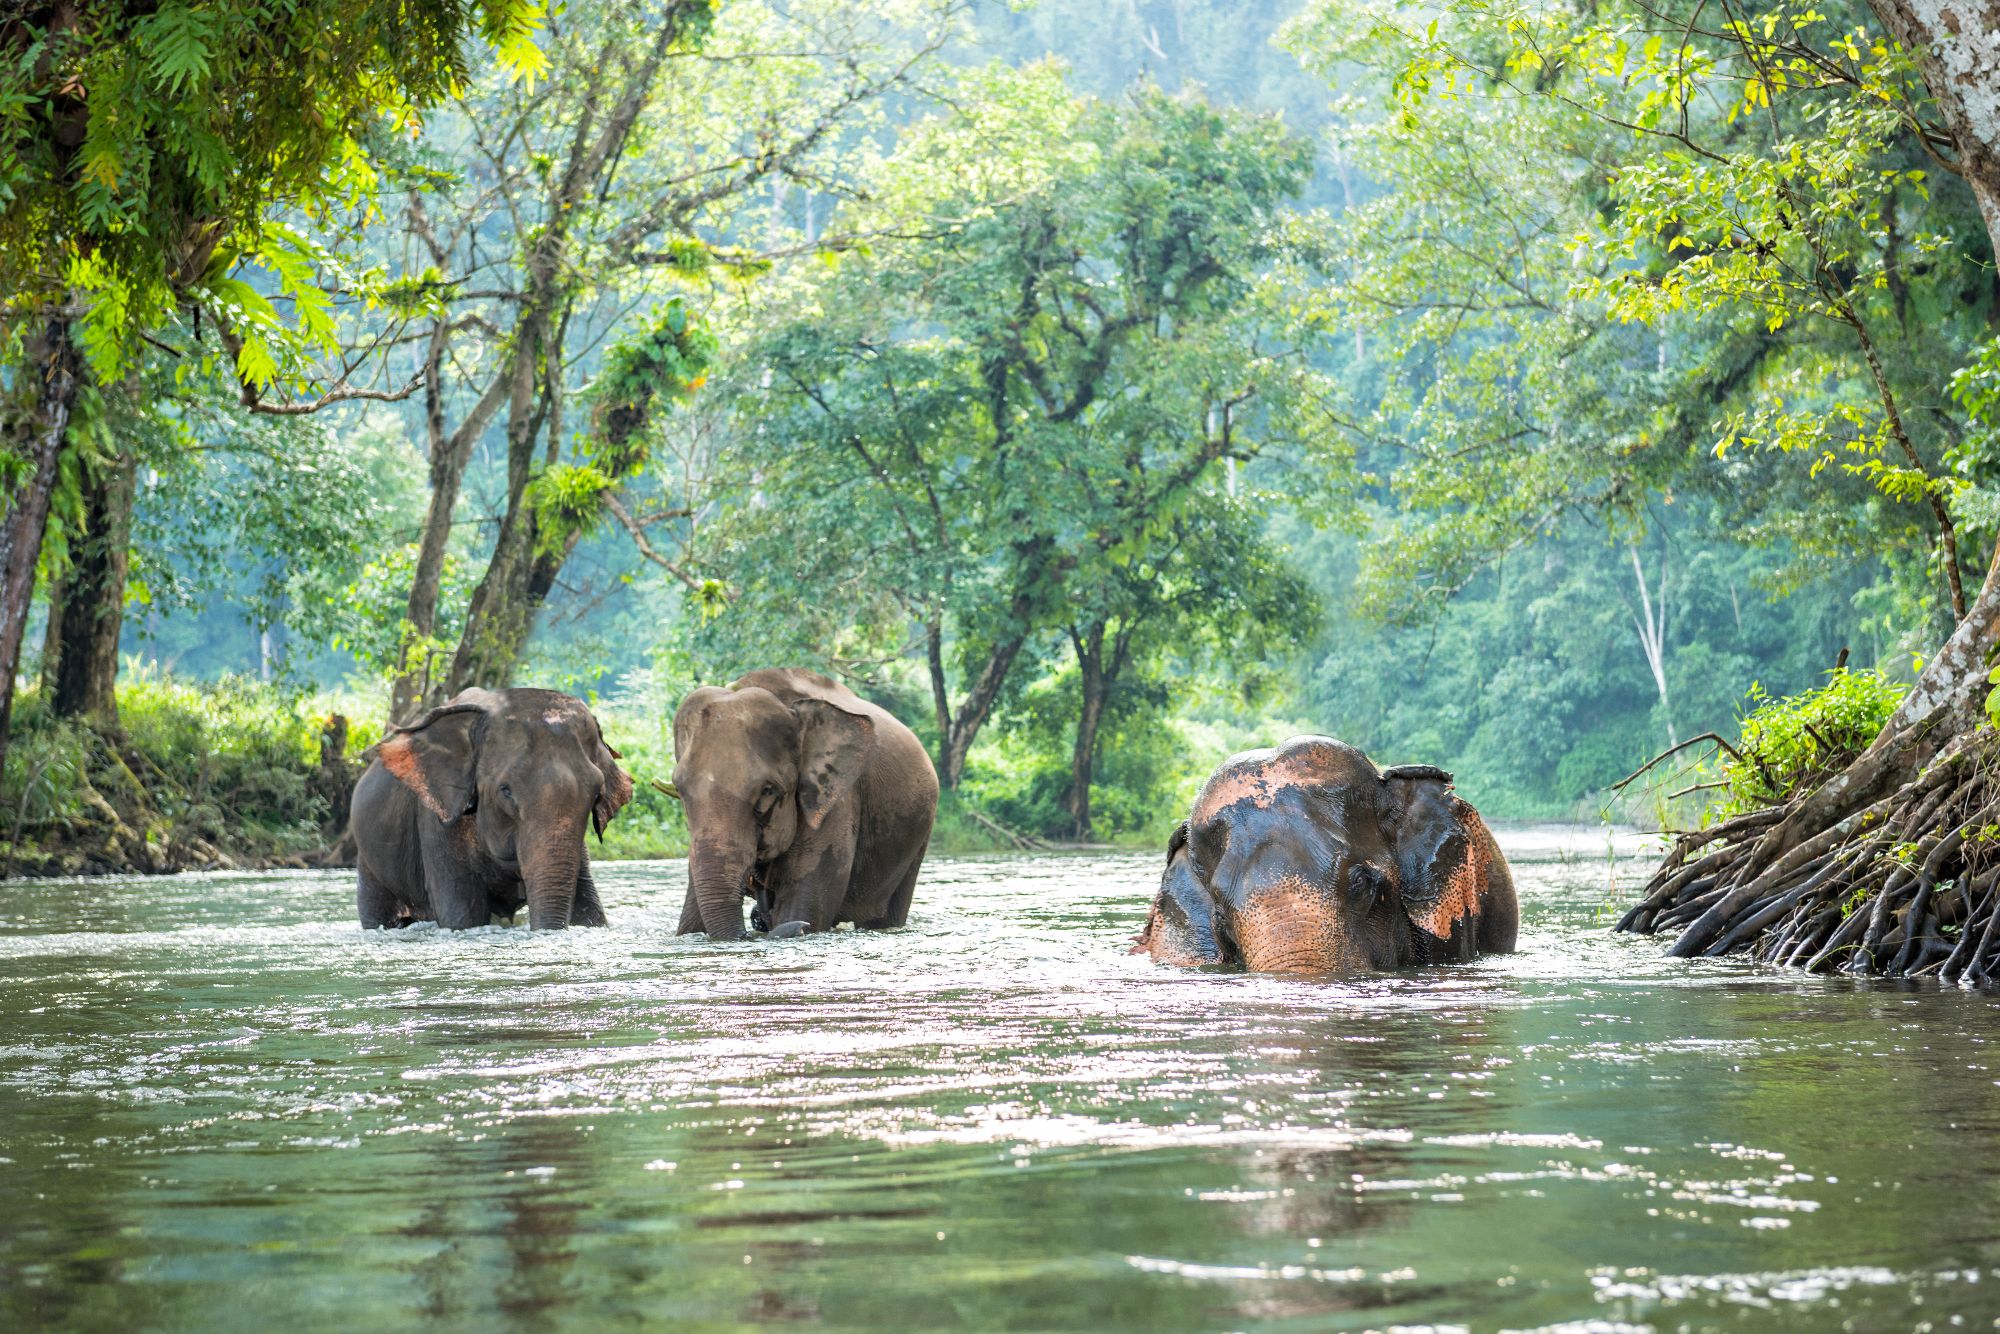 Book tour '2-Day Trekking, Elephants & Rafting in Chiang Mai'